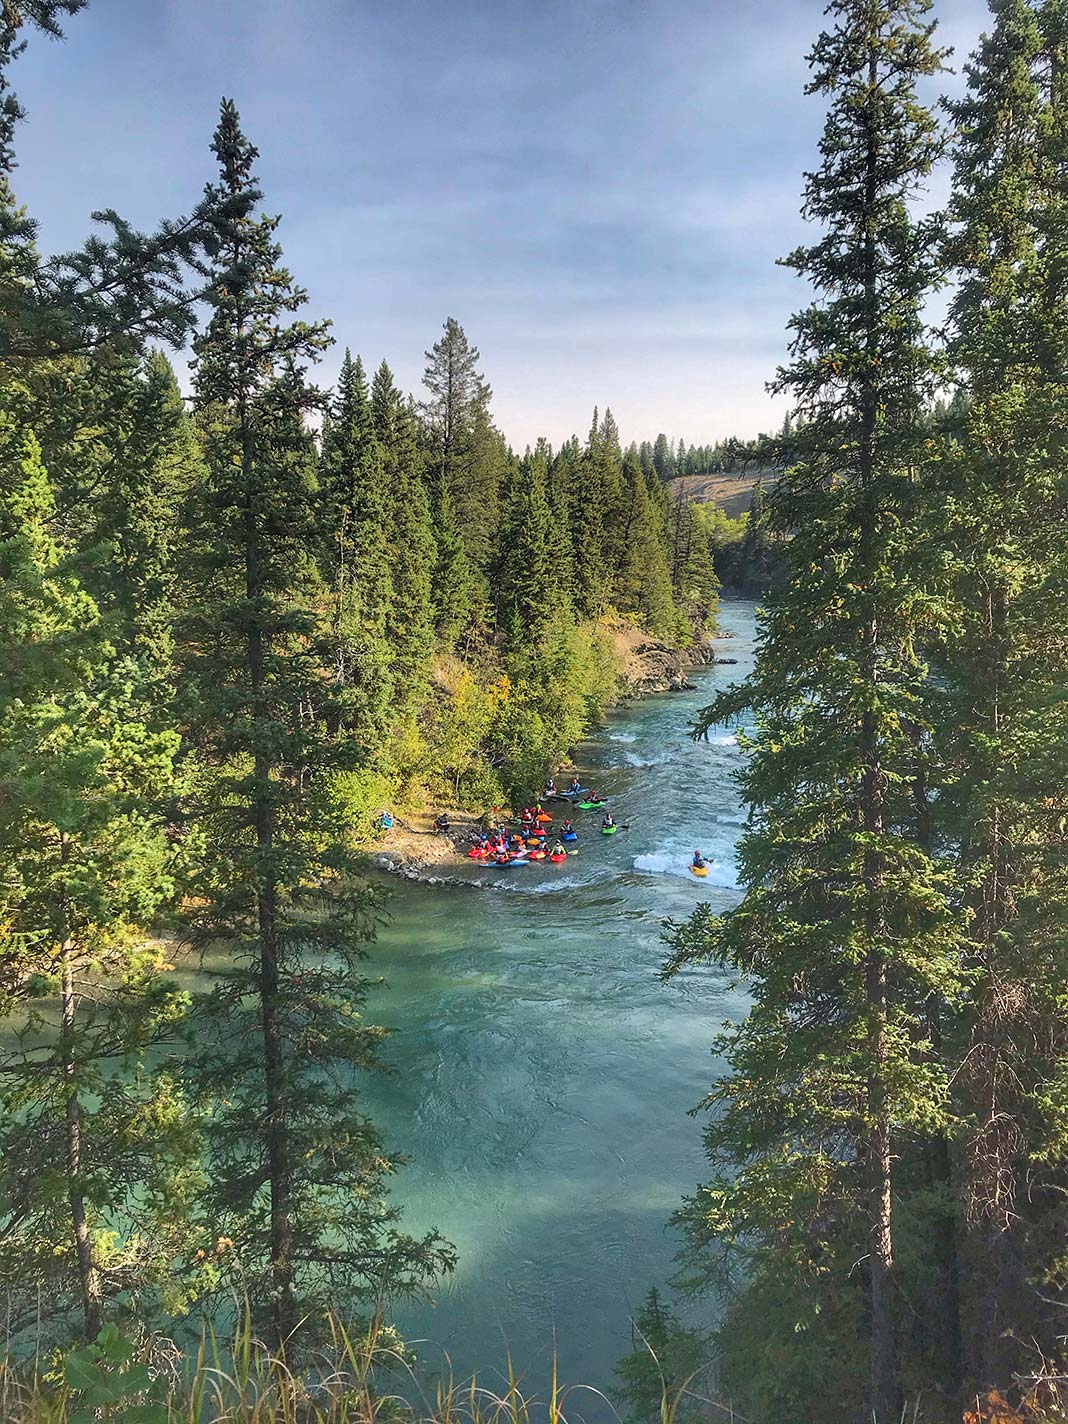 Photo from a distance through trees of group of kayakers gathered on a river